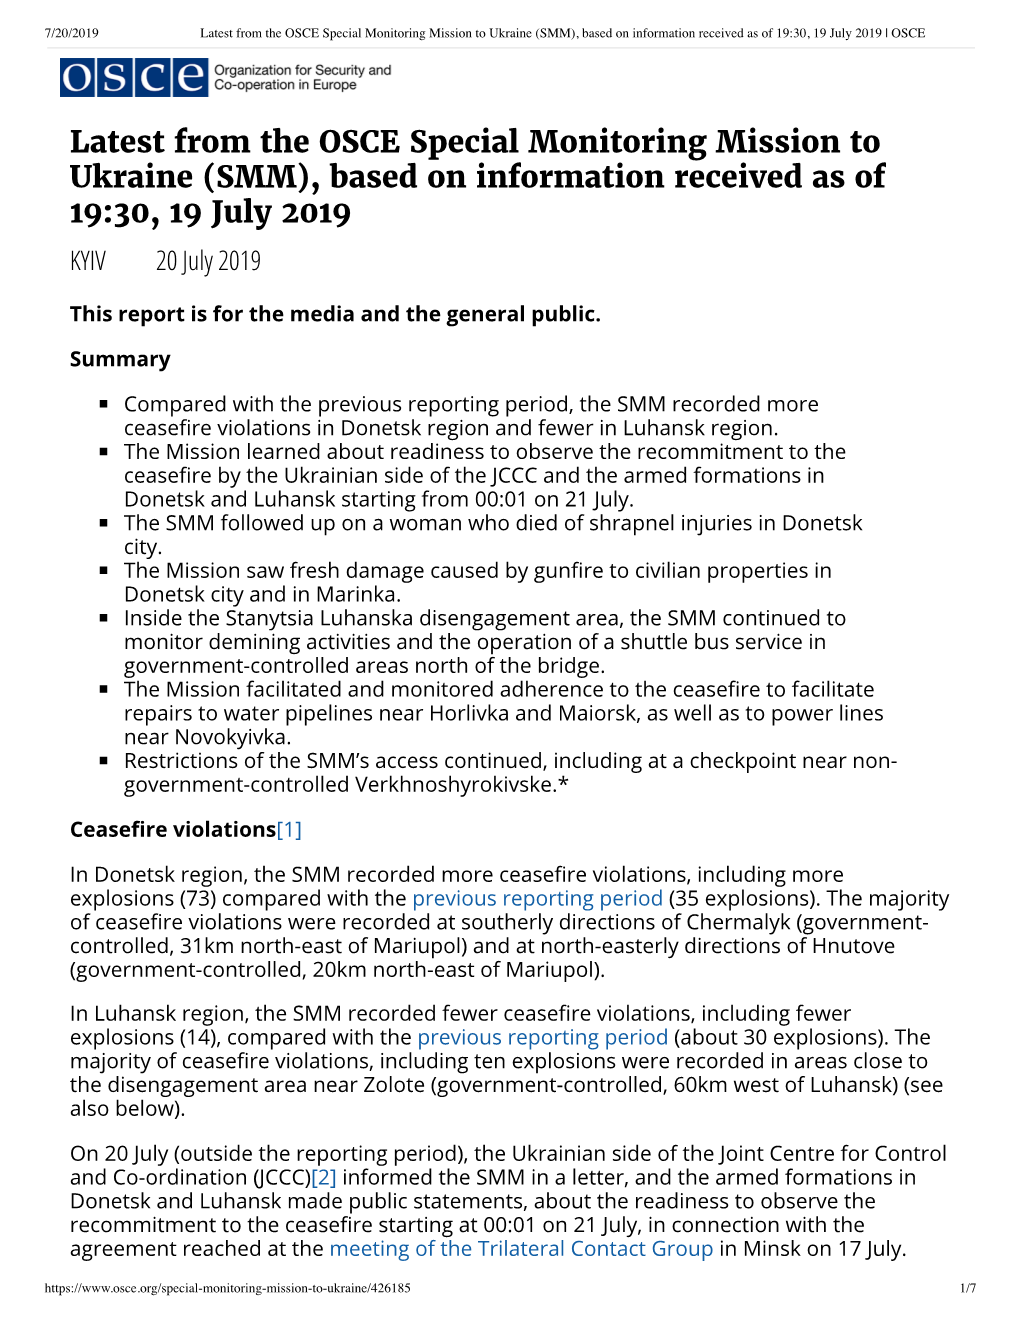 Latest from the OSCE Special Monitoring Mission to Ukraine (SMM), Based on Information Received As of 19:30, 19 July 2019 | OSCE